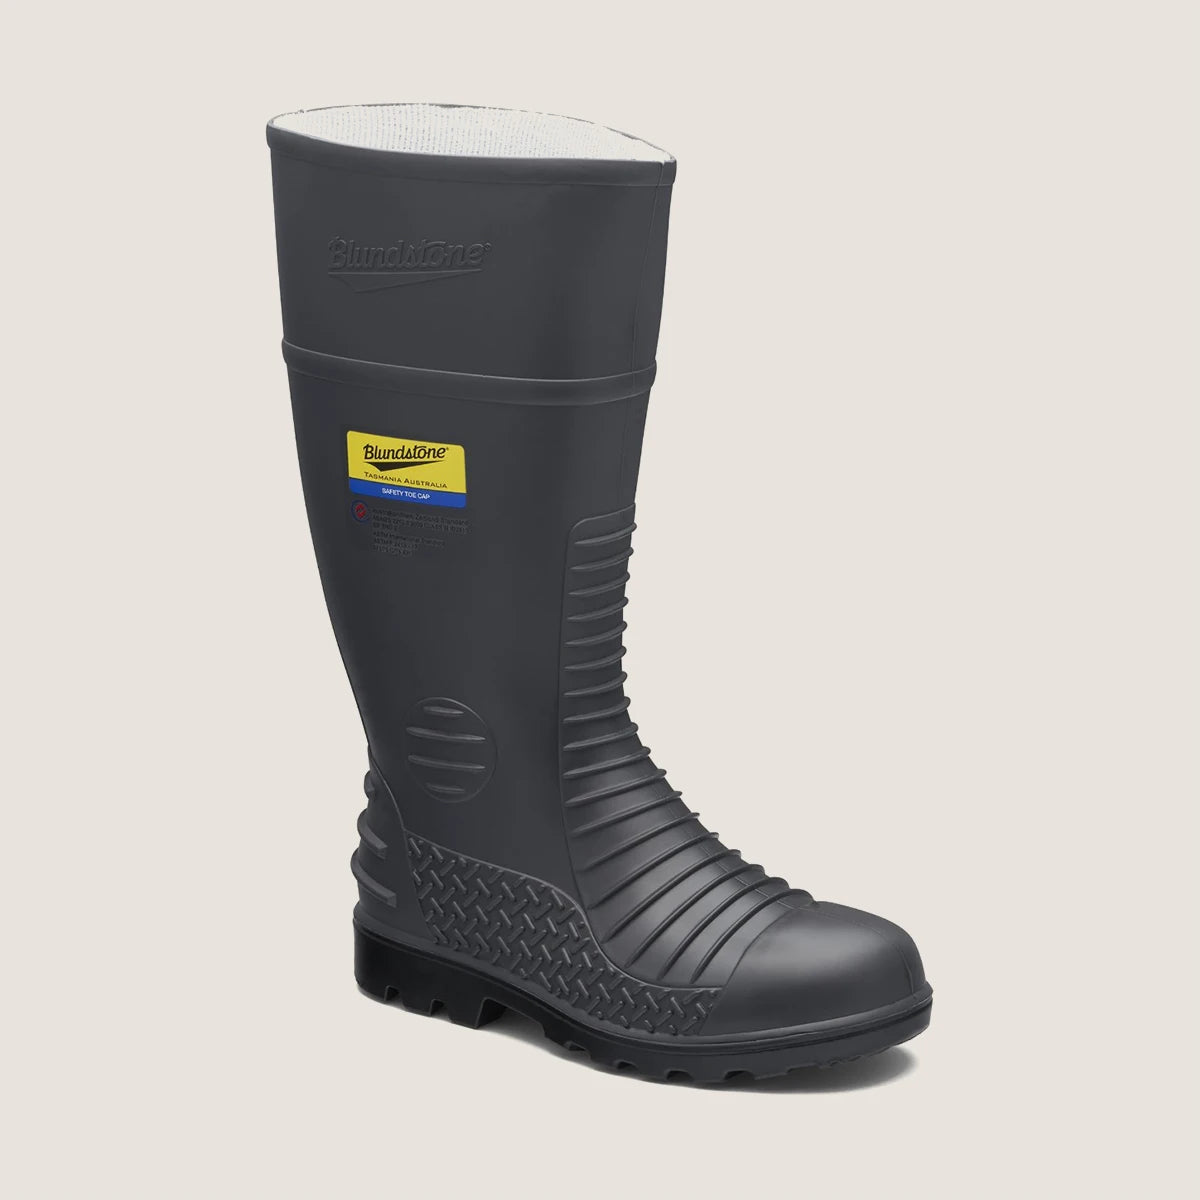 Blundstone 025 Safety Gumboots-Grey